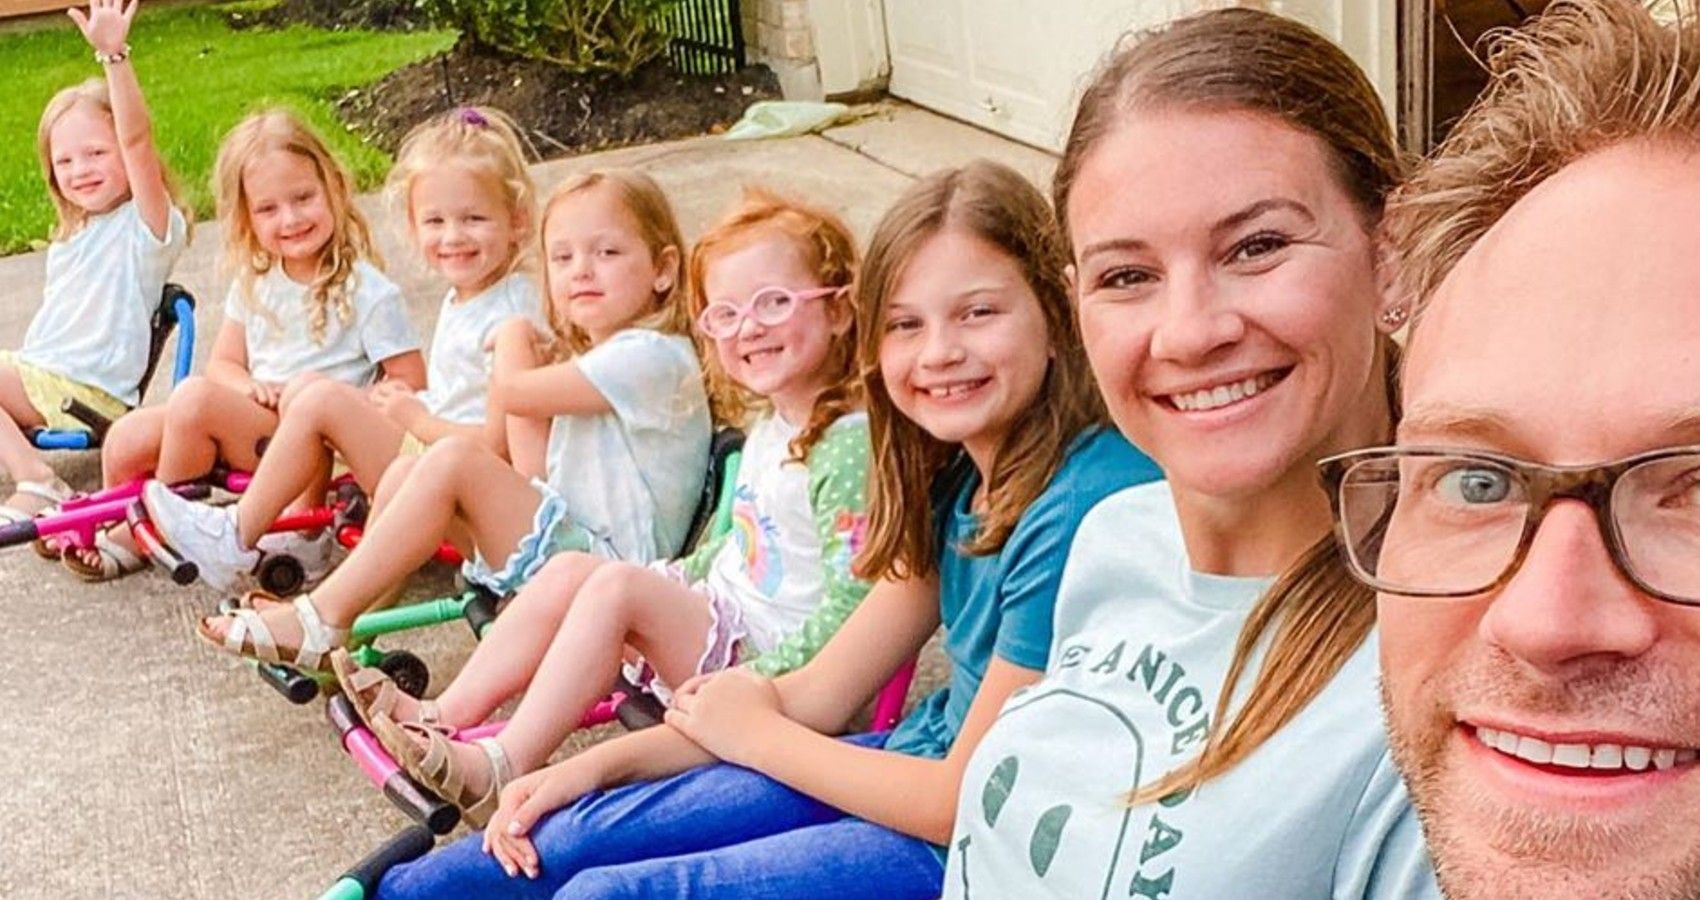 New 'OutDaughtered' Episodes Are Coming In June